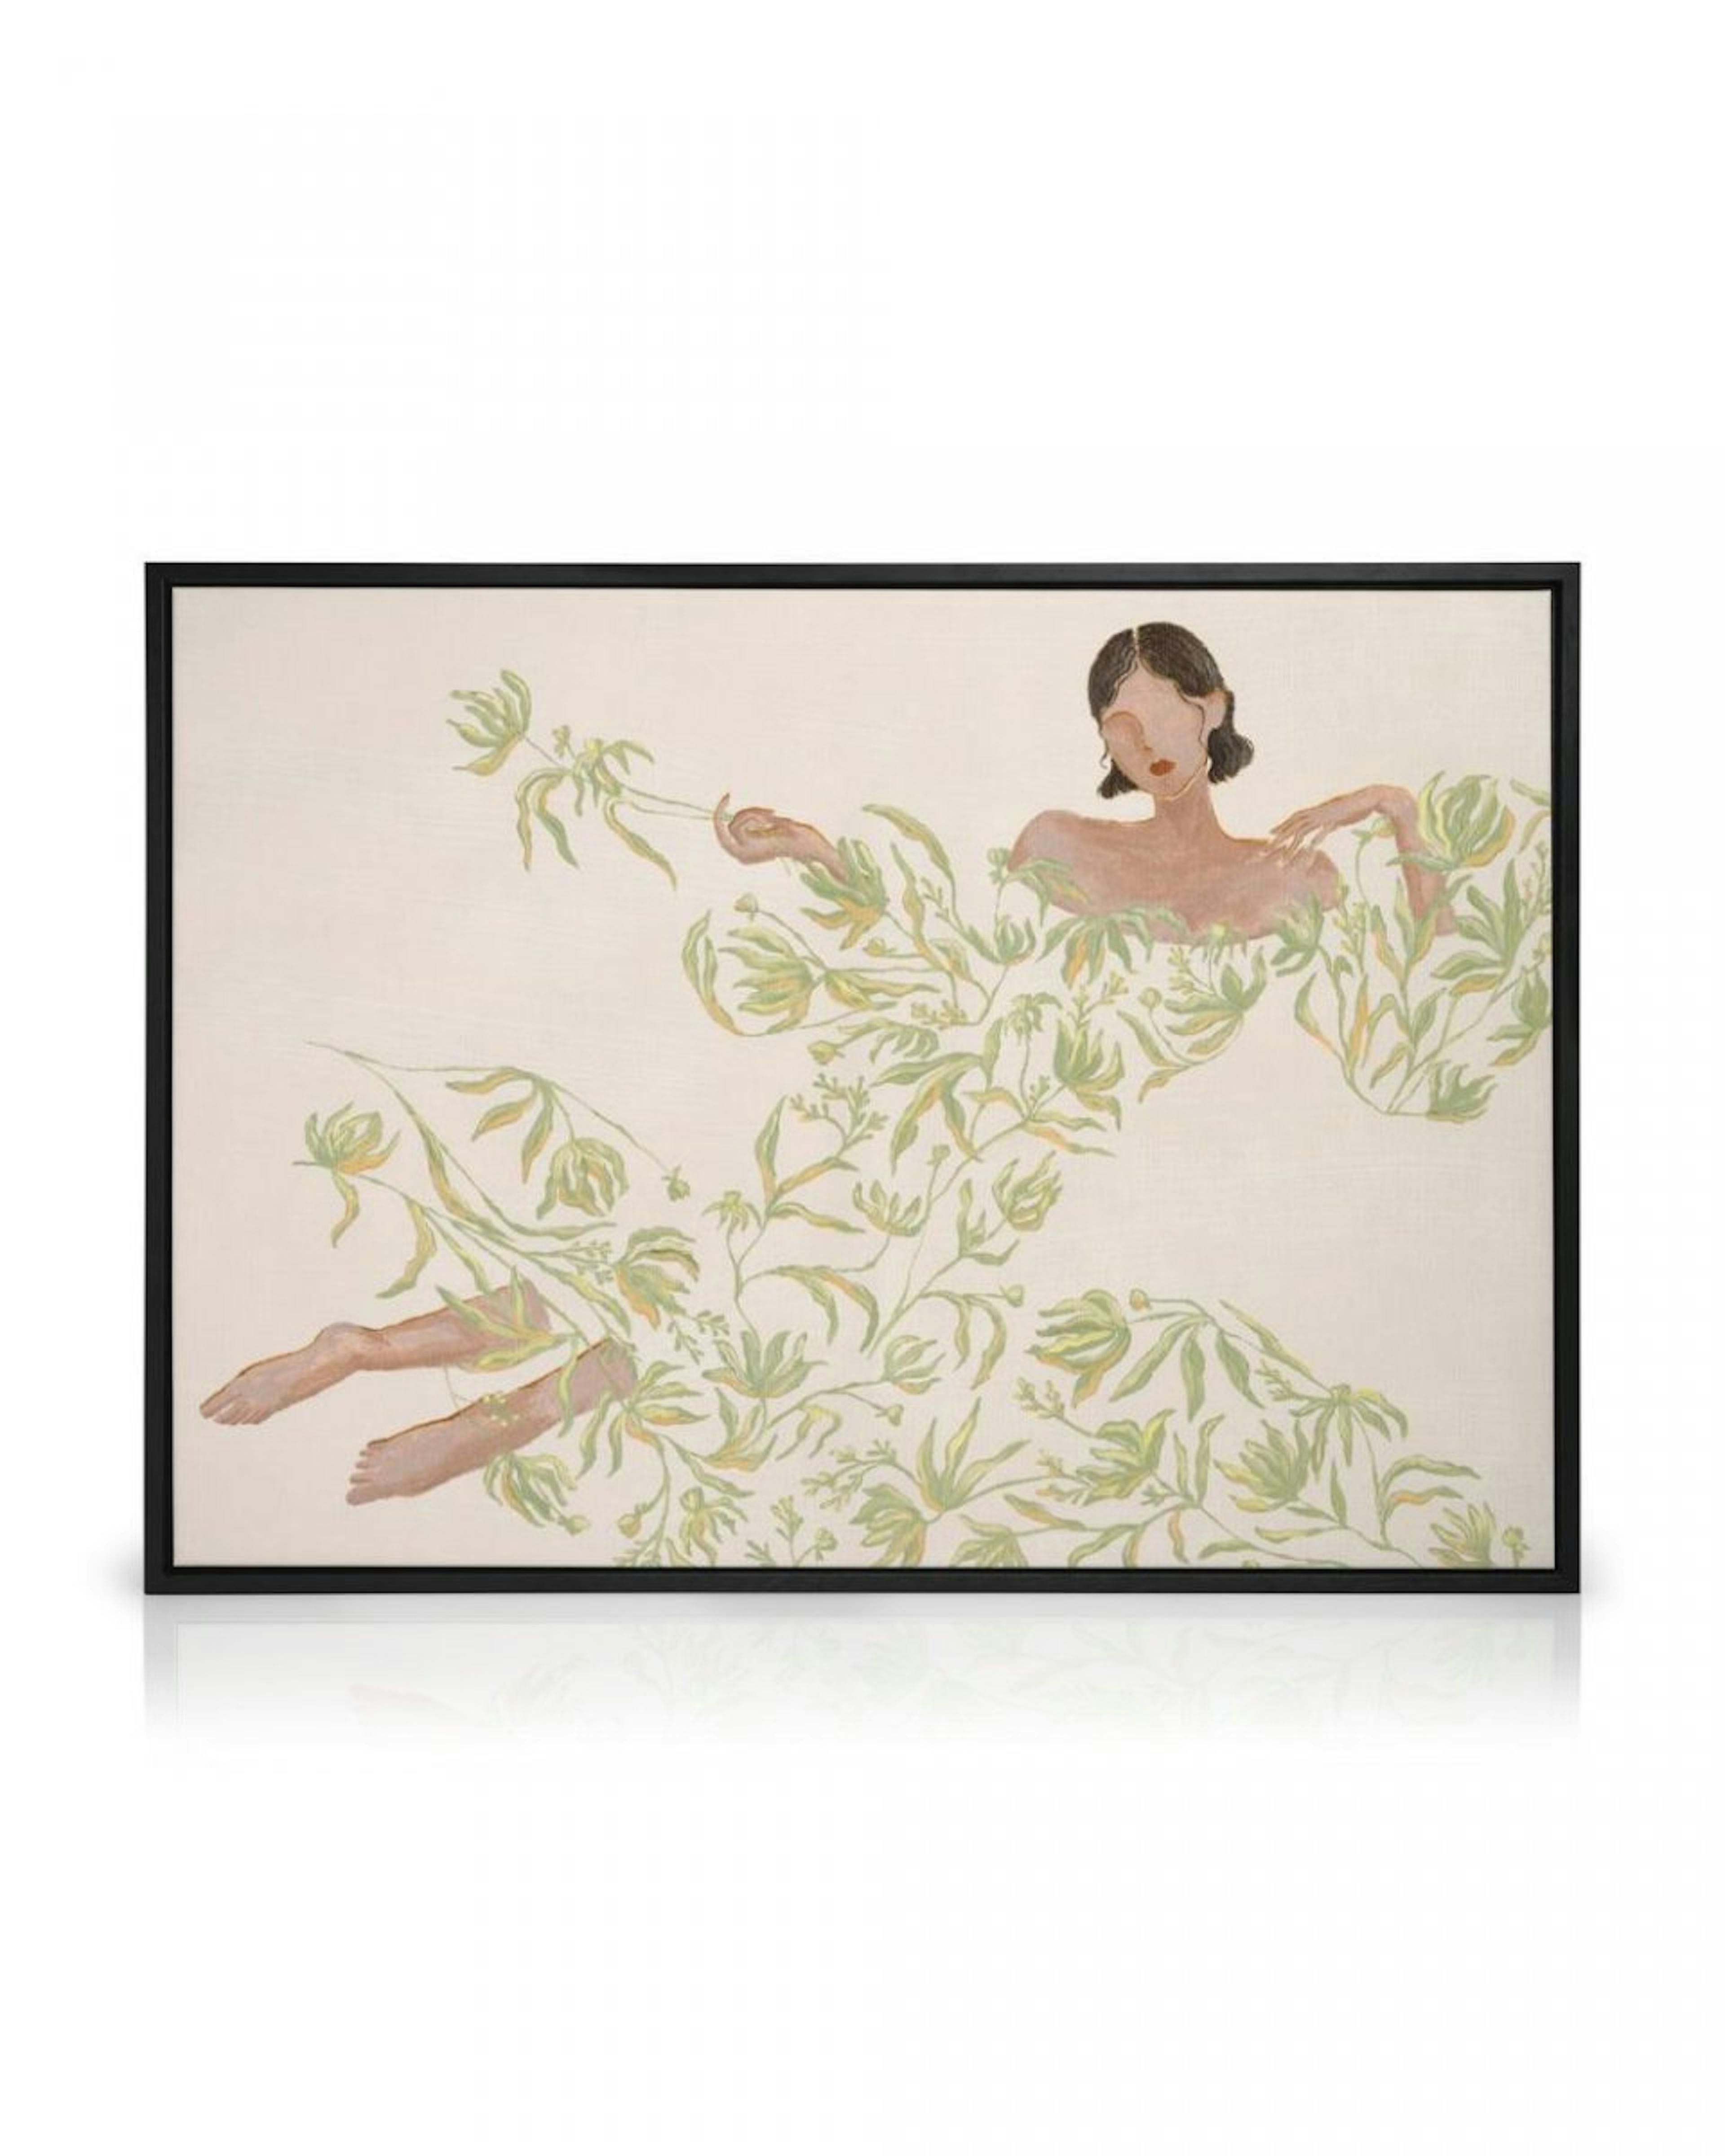 Lady in Green Floral Dress Toile